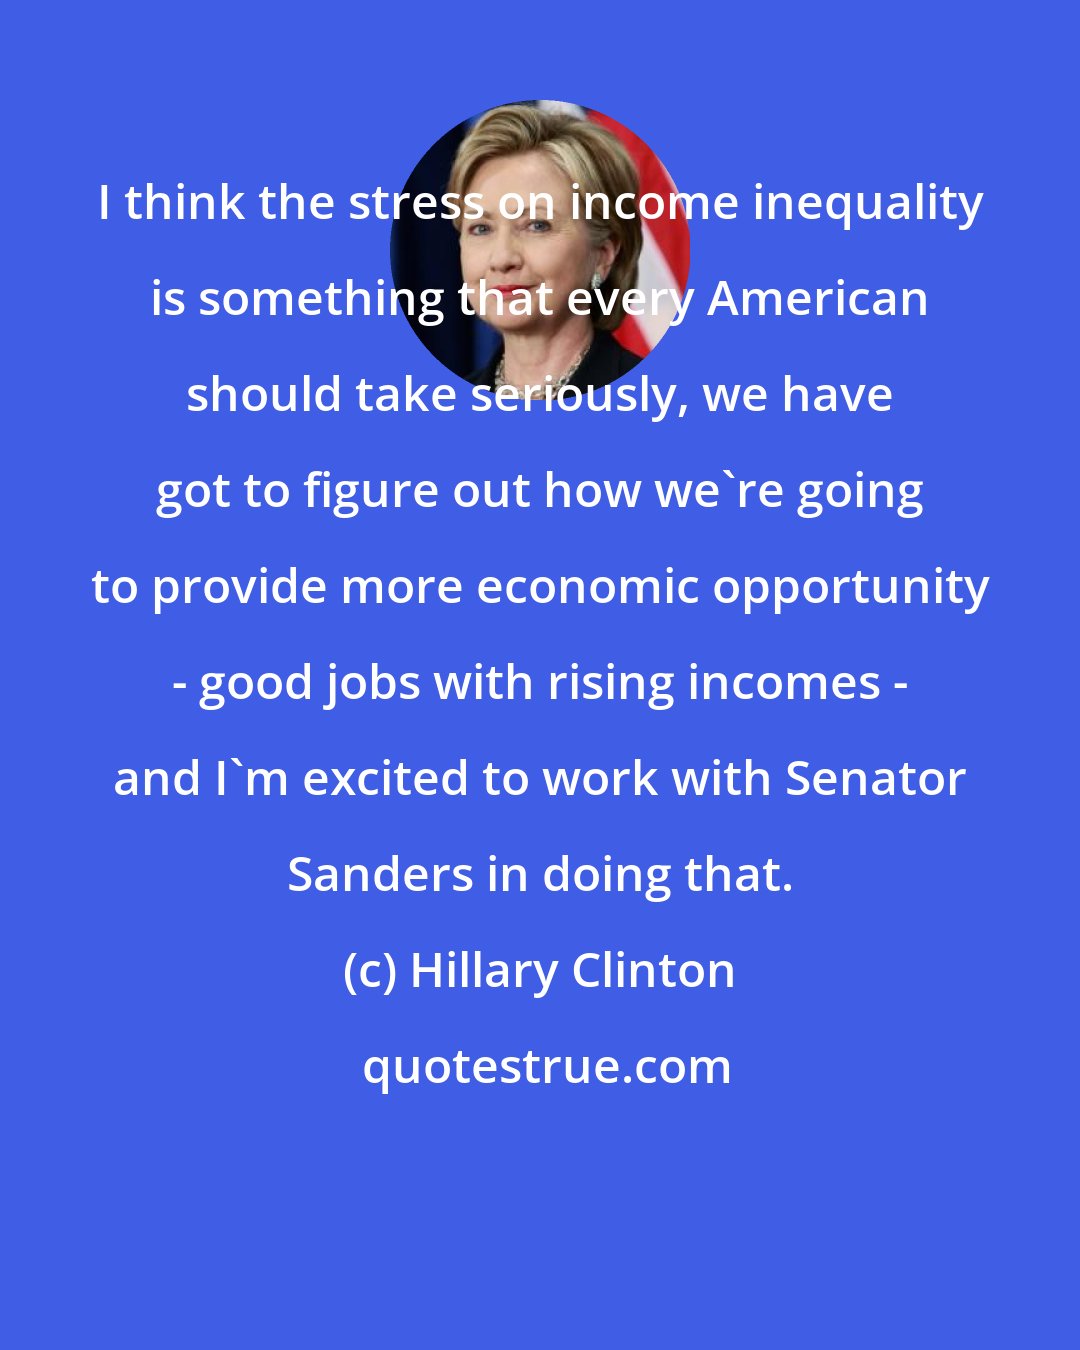 Hillary Clinton: I think the stress on income inequality is something that every American should take seriously, we have got to figure out how we're going to provide more economic opportunity - good jobs with rising incomes - and I'm excited to work with Senator Sanders in doing that.